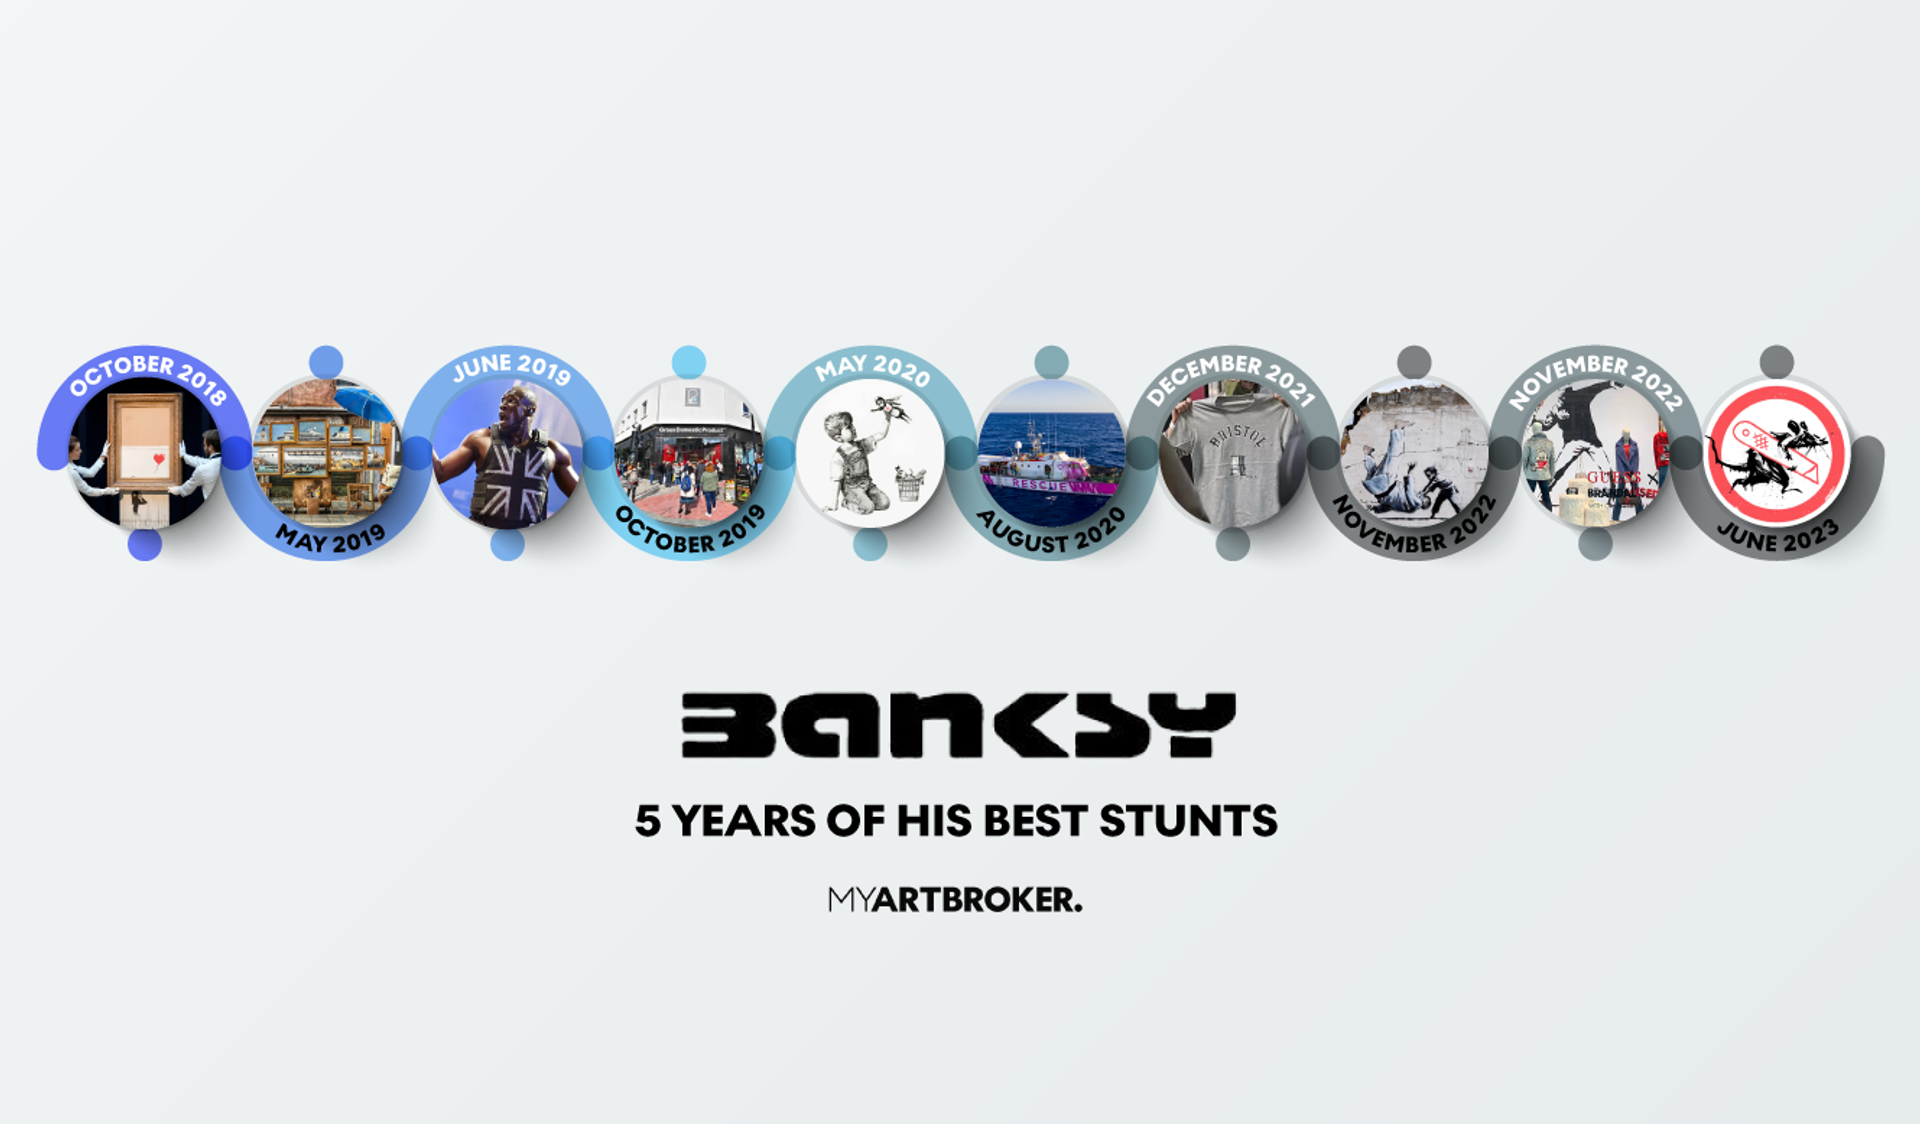 An image showing a timelines of Banksy's stunts over the past five years.